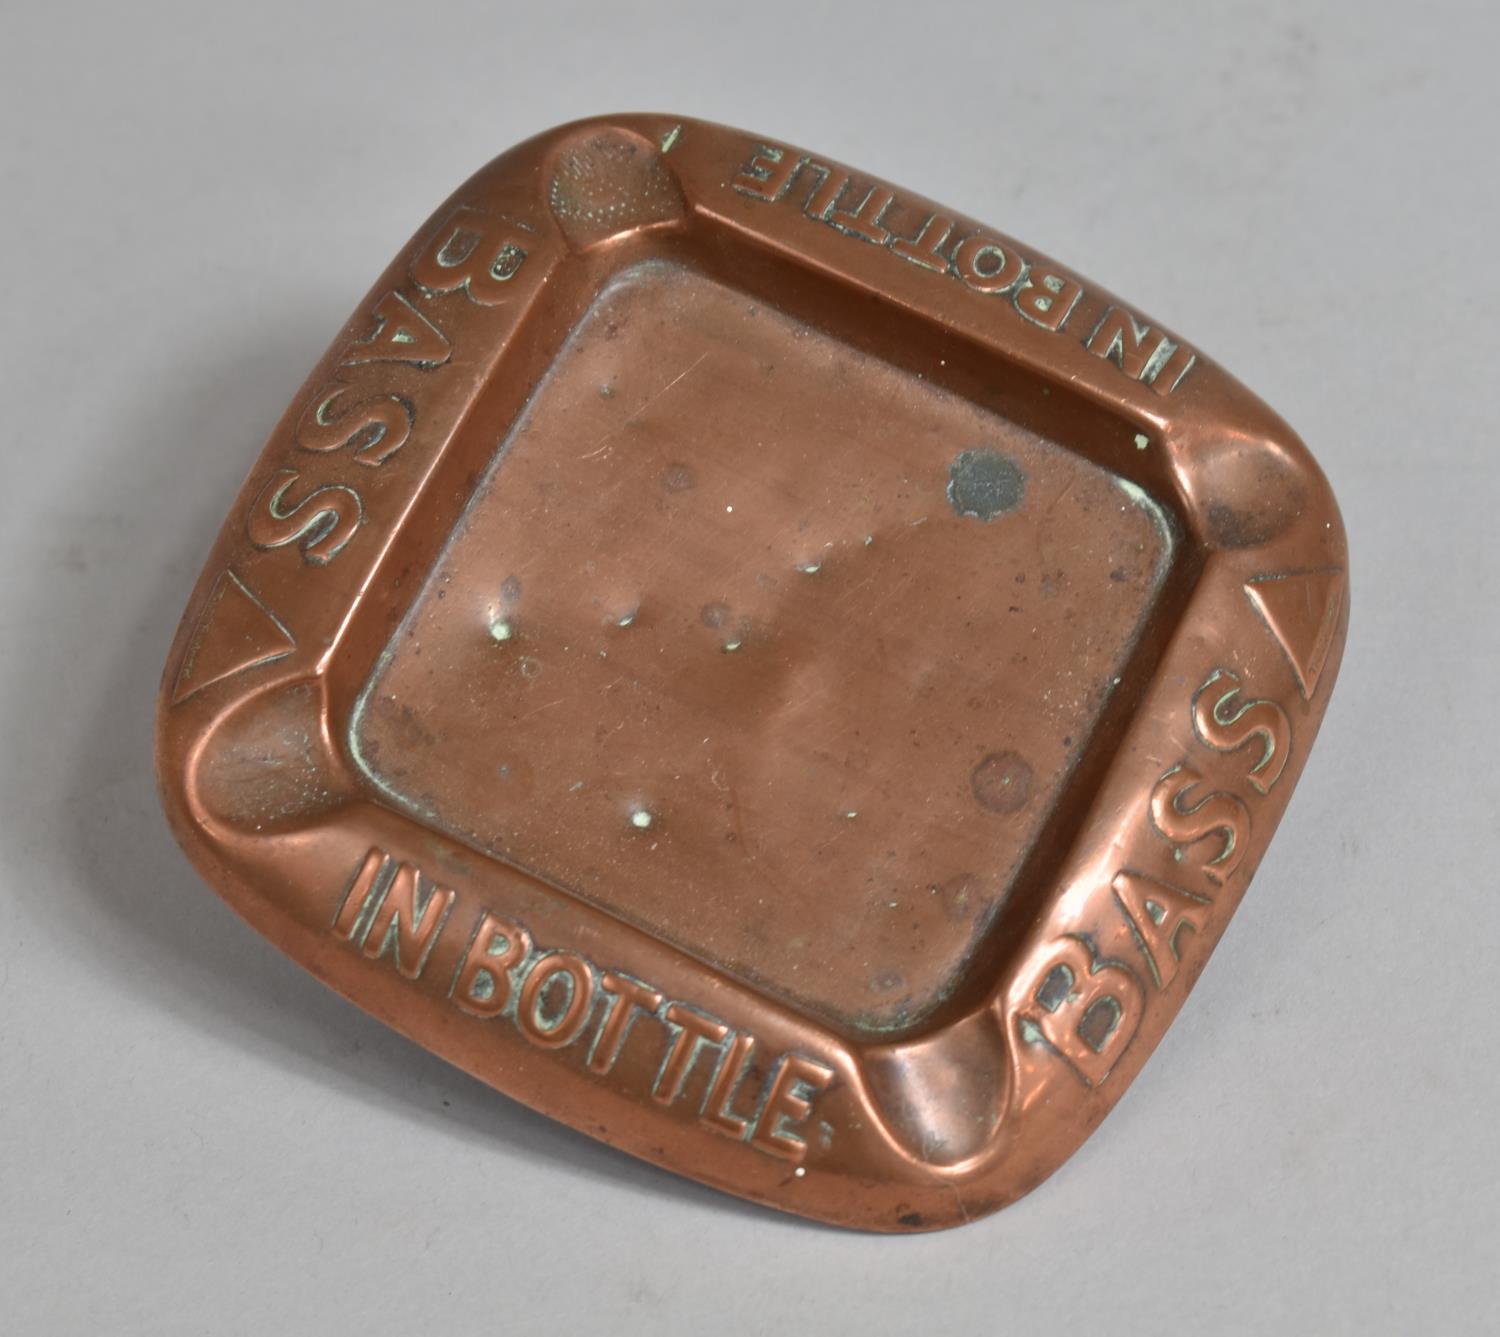 A Vintage Copper Advertising Ashtray, "Bass in Bottle", 12cm Square